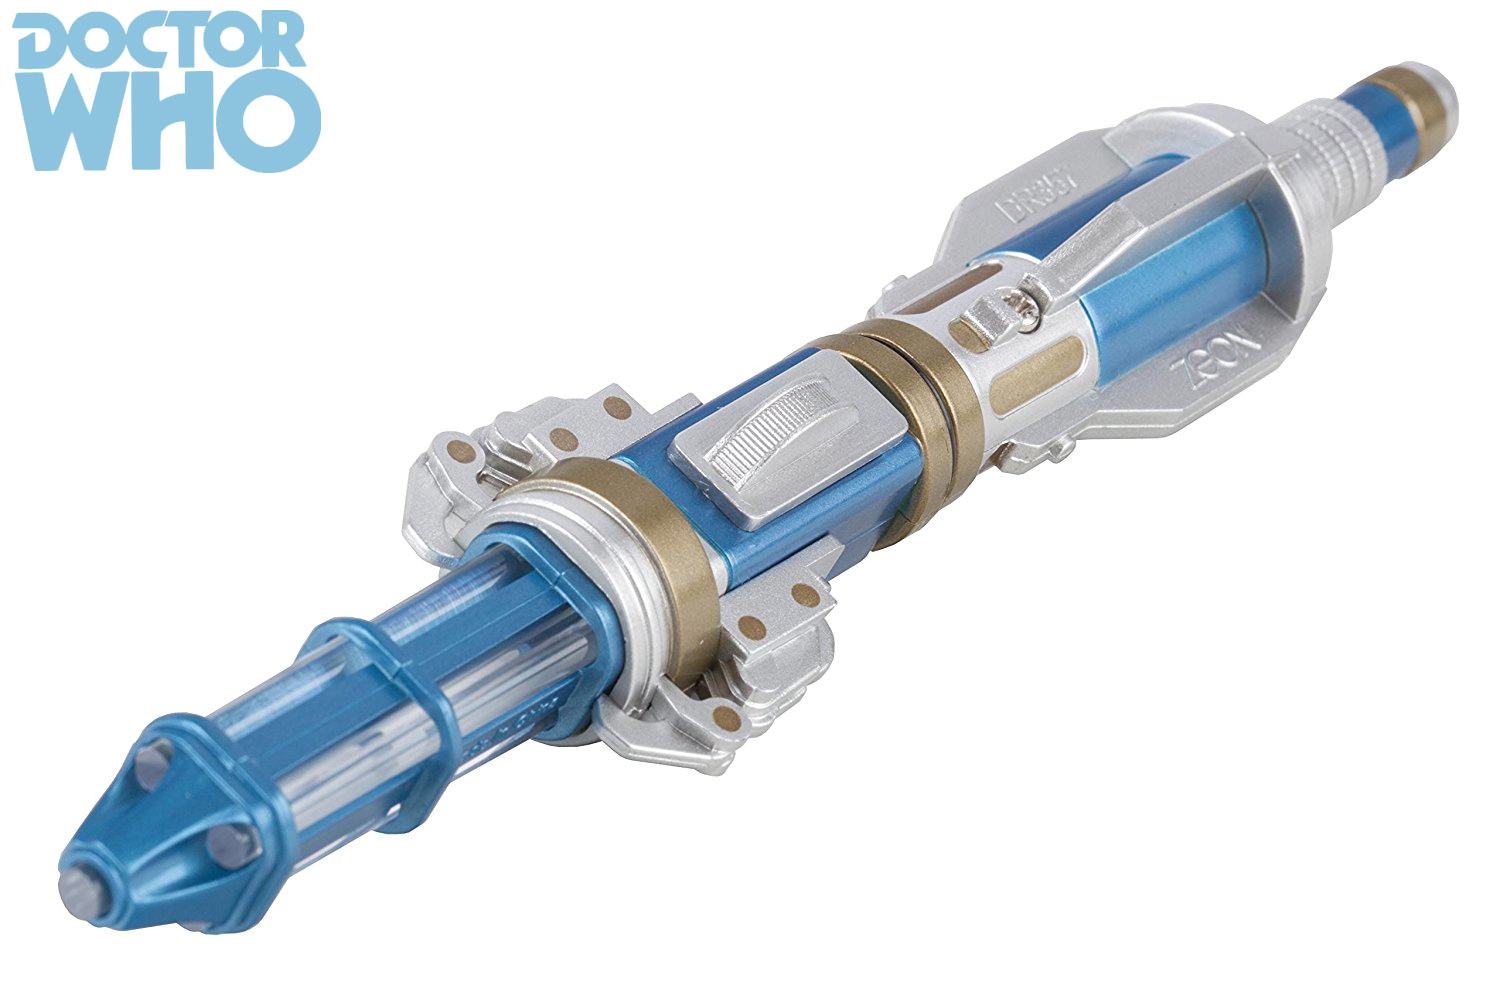 Lanterna-Doctor-Who-Sonic-Screwdriver-LED-Torch-02